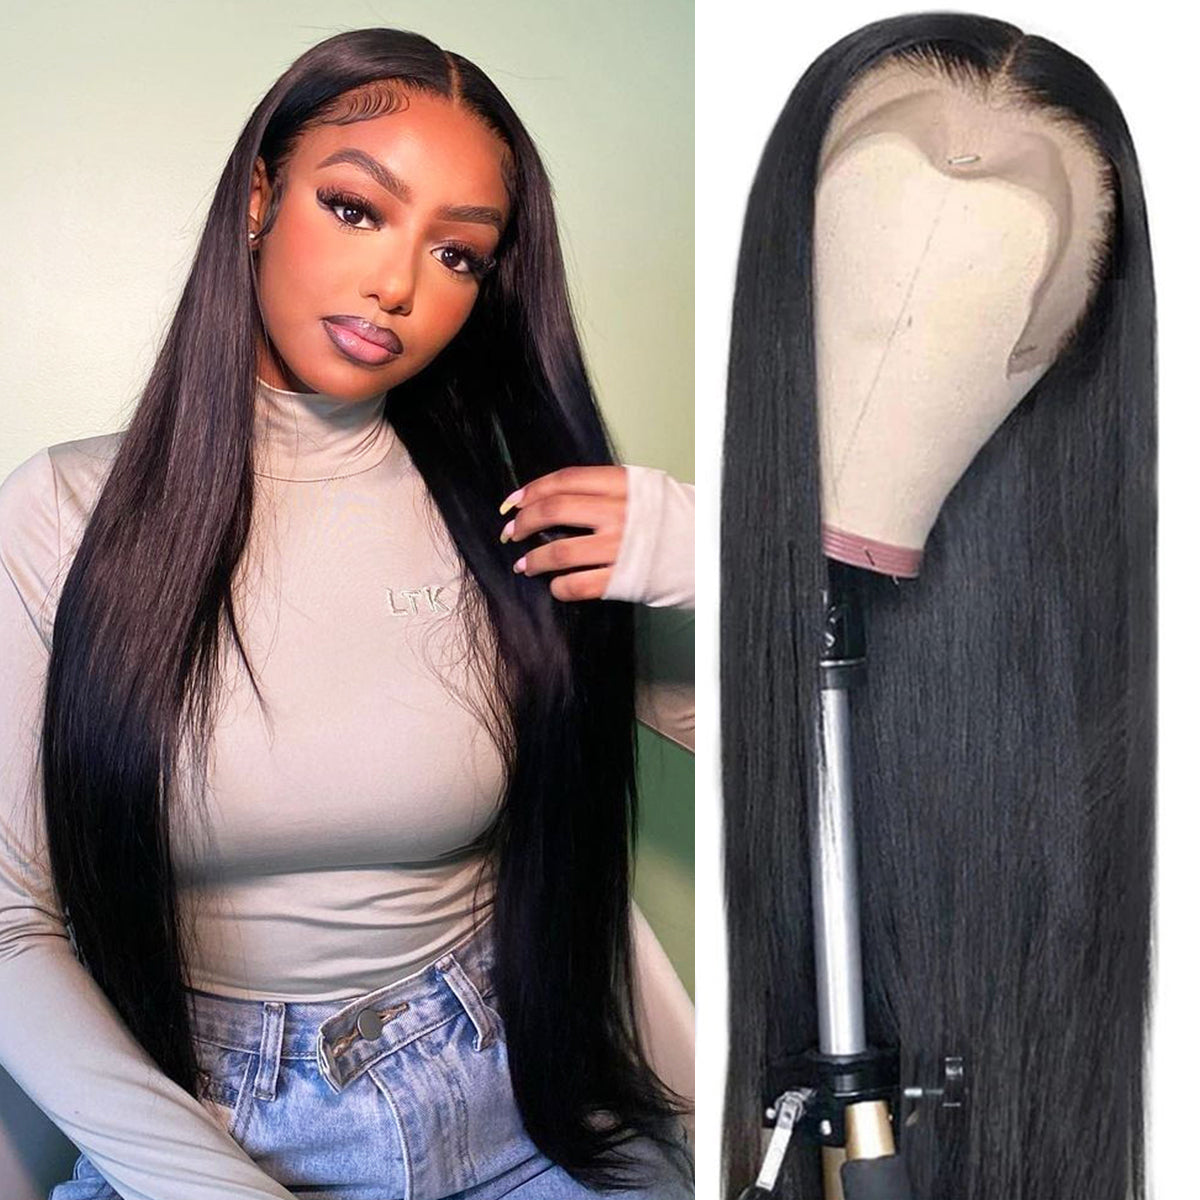 FORGIRLFOREVER Pre-bleached Knots Straight Wig With Baby Hair 13x4 Lace Frontal Human Hair Wigs